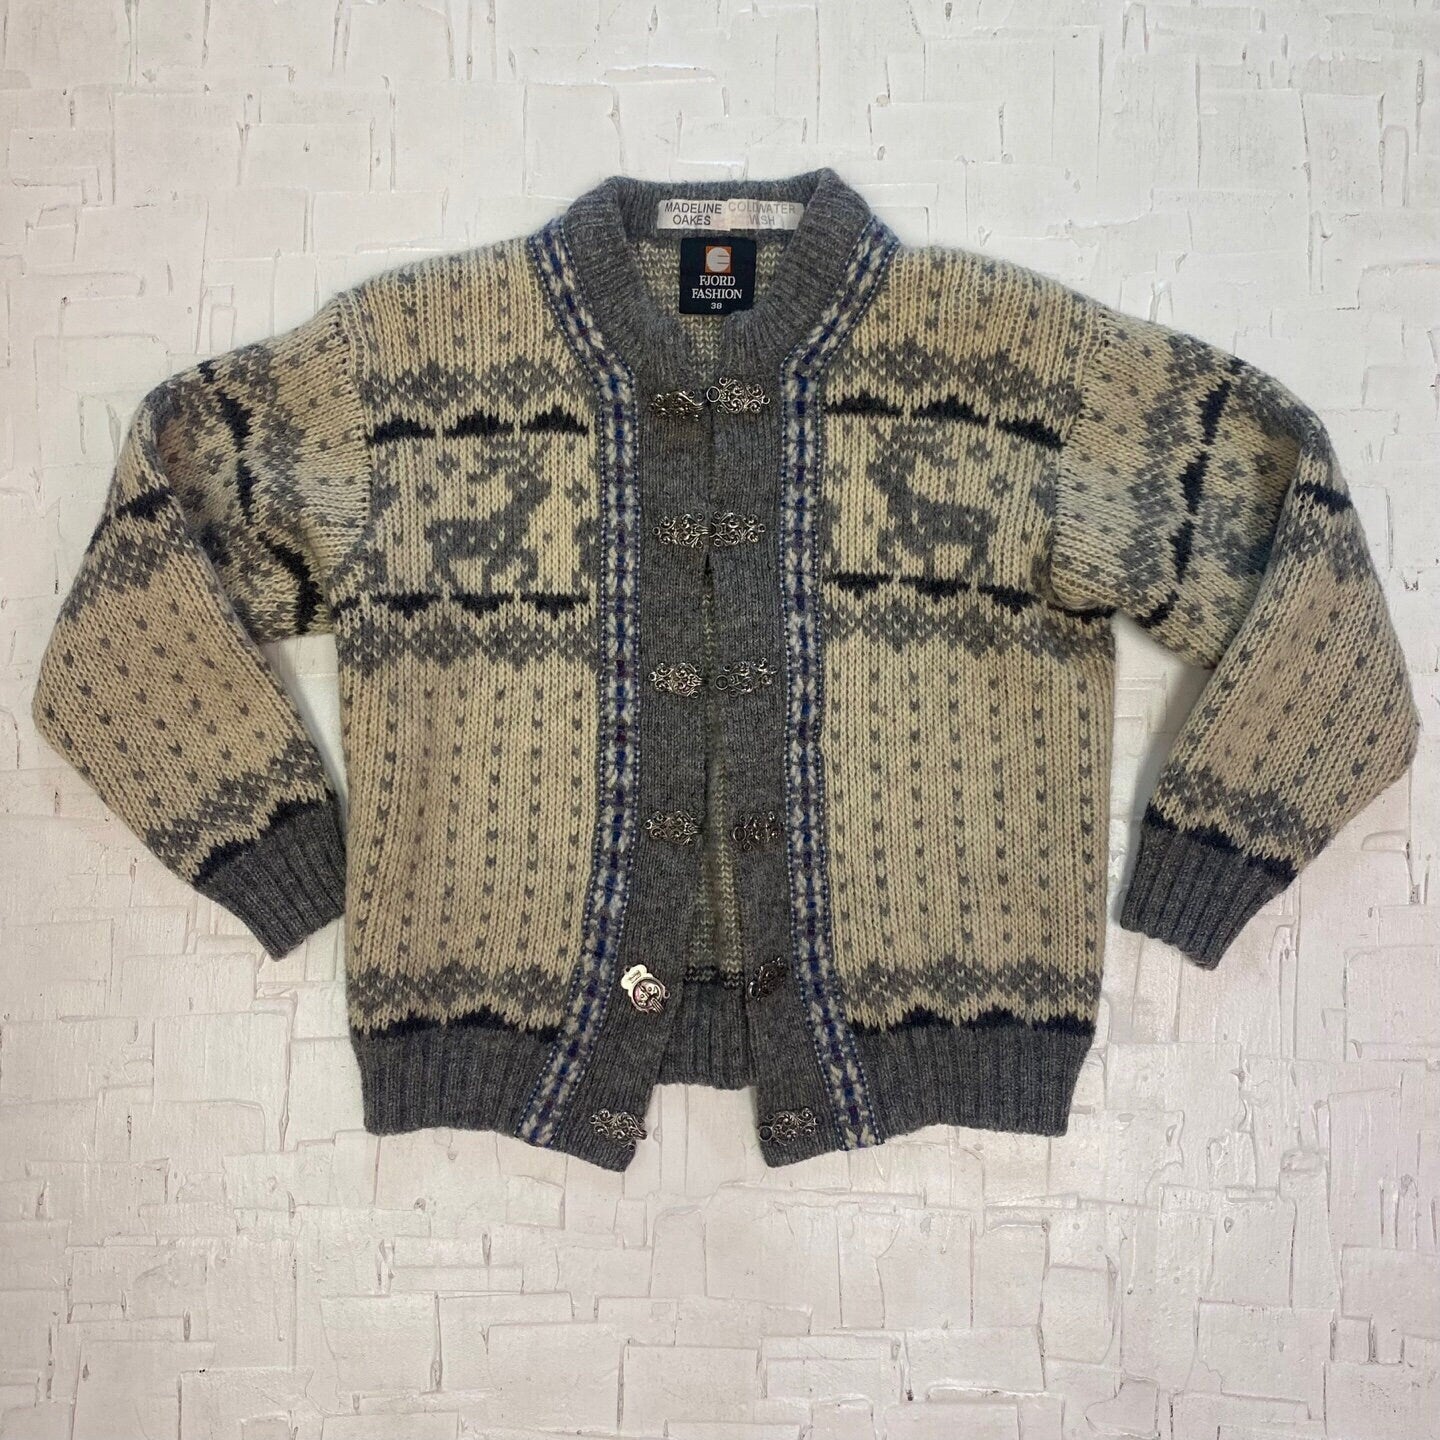 Vintage Fjord Fashion Wool Knit Norwegian Sweater with Metal Button Clasps | Vintage Knit Sweater | Deer Design | Size 38 / Small | M-3021